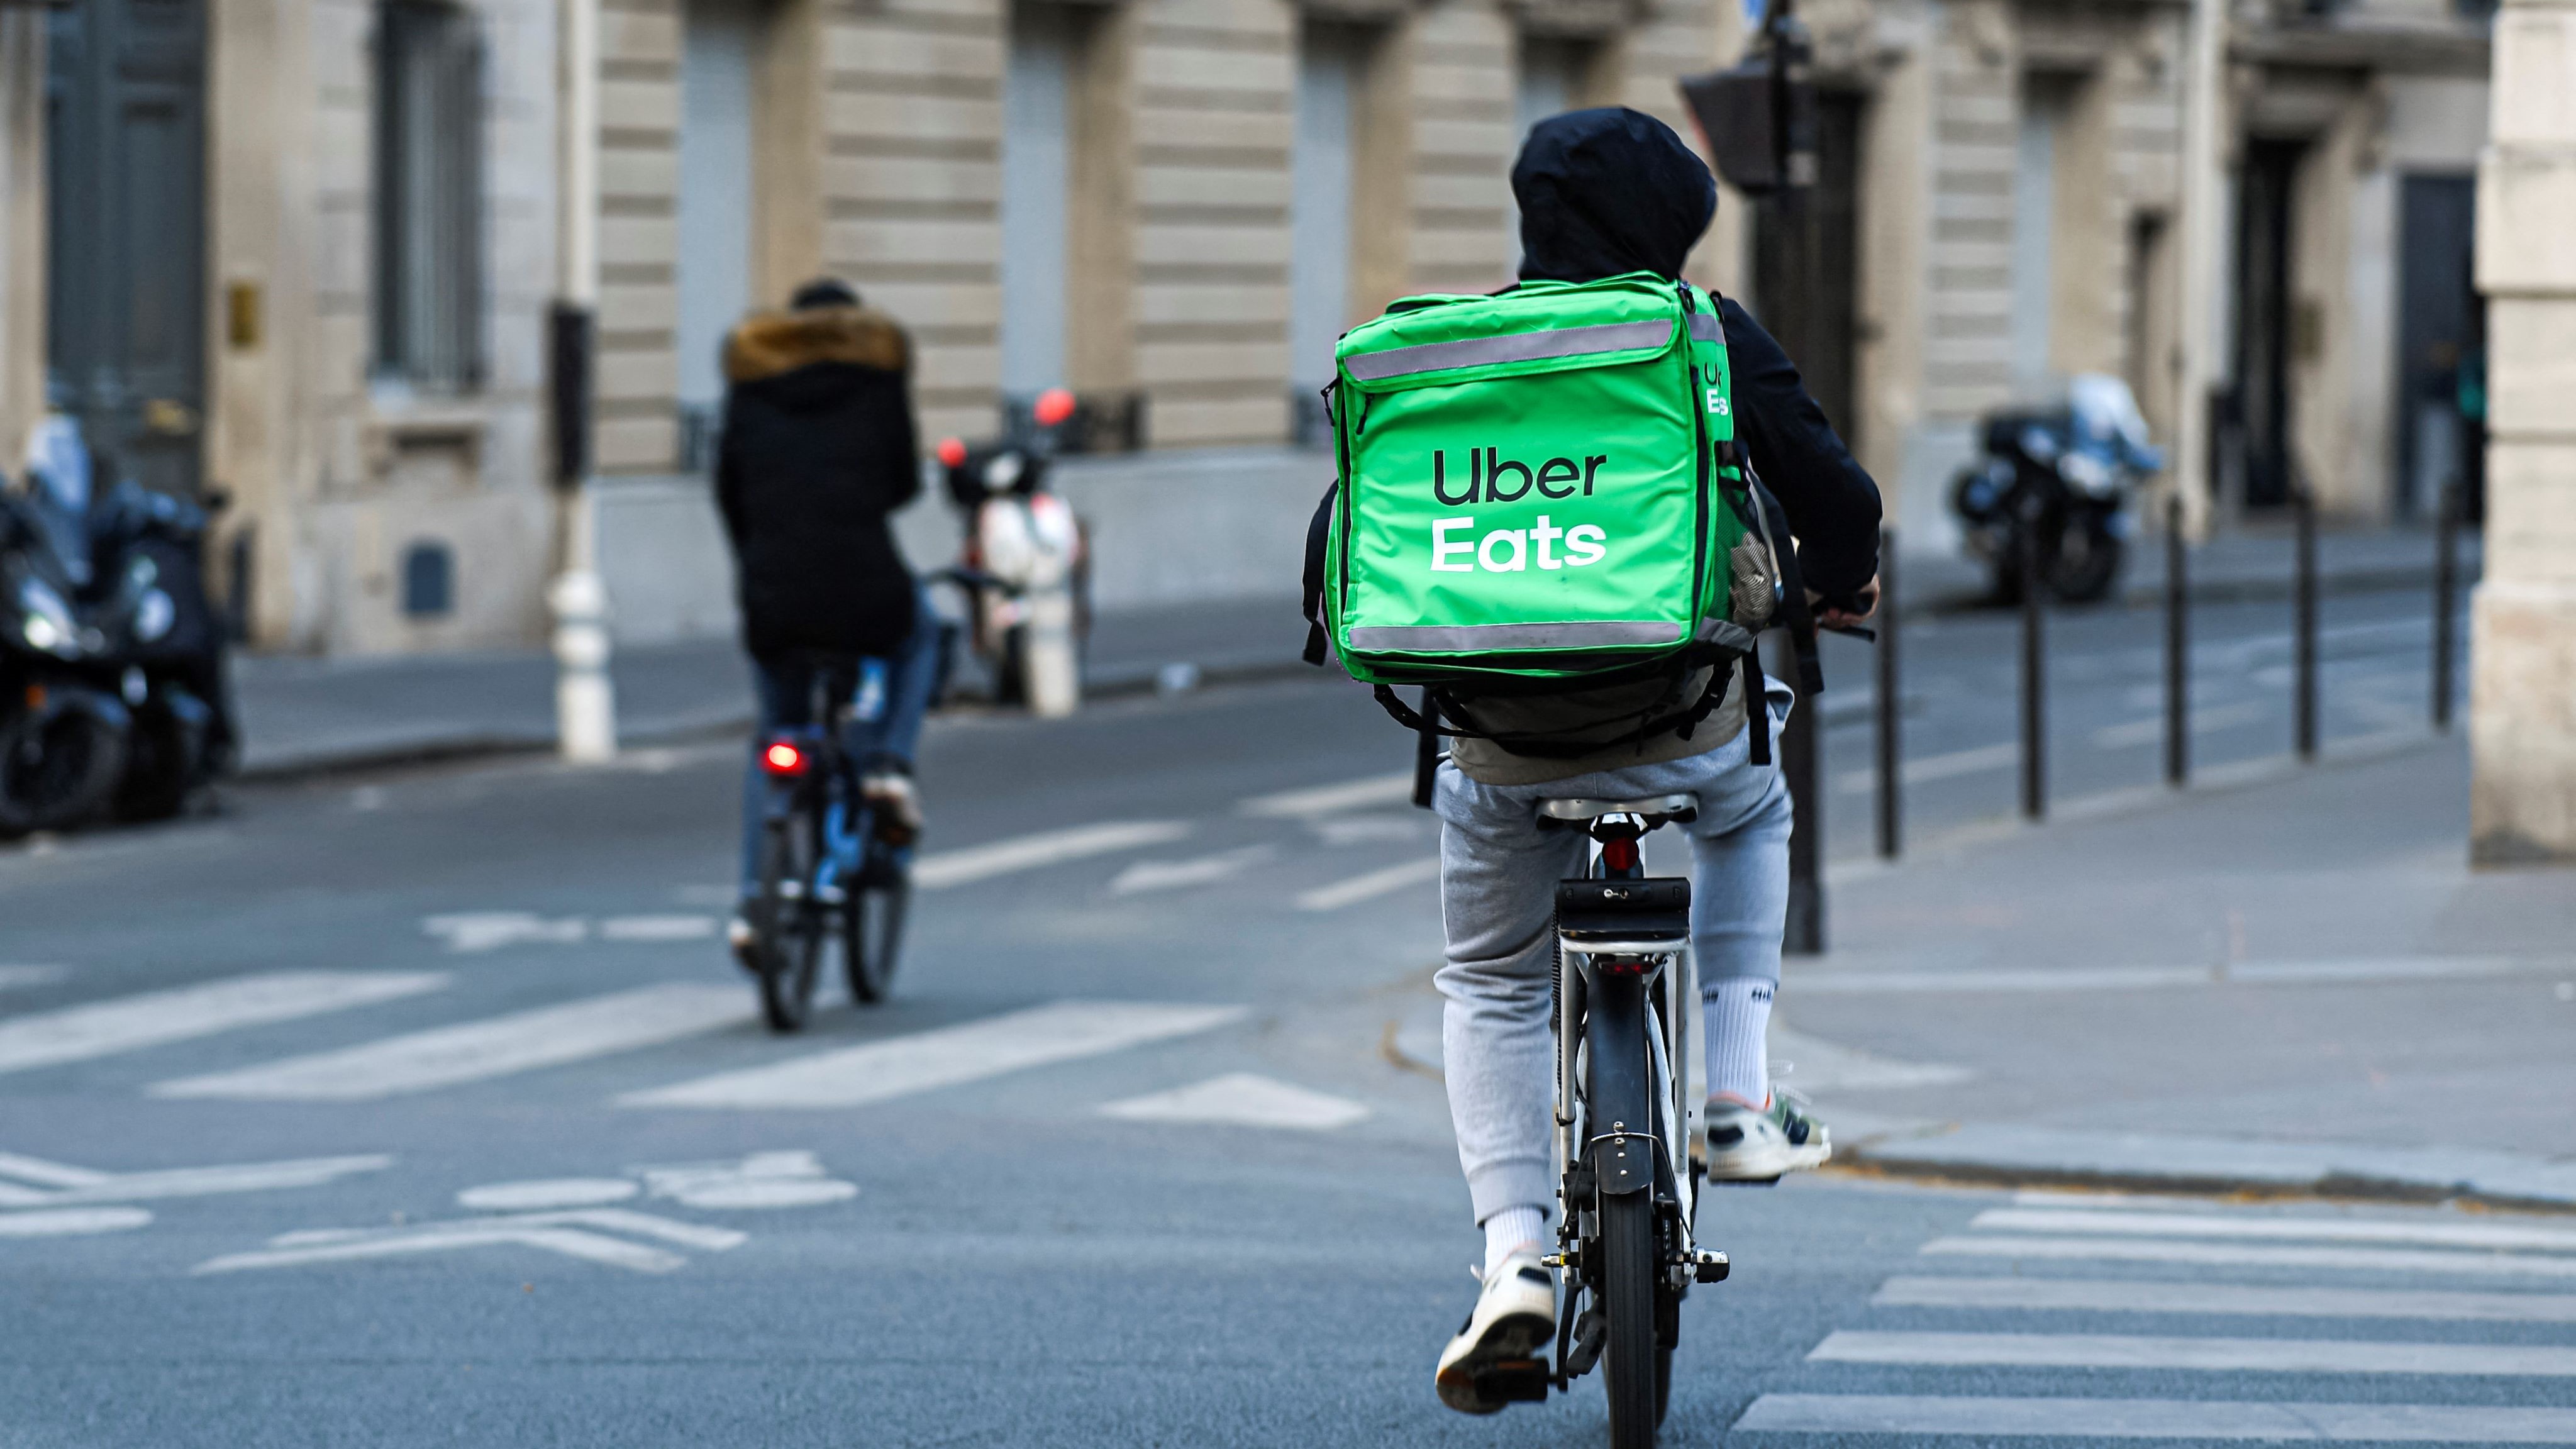 The EU’s Gig Economy Rules Were Defeated by Lobbying efforts